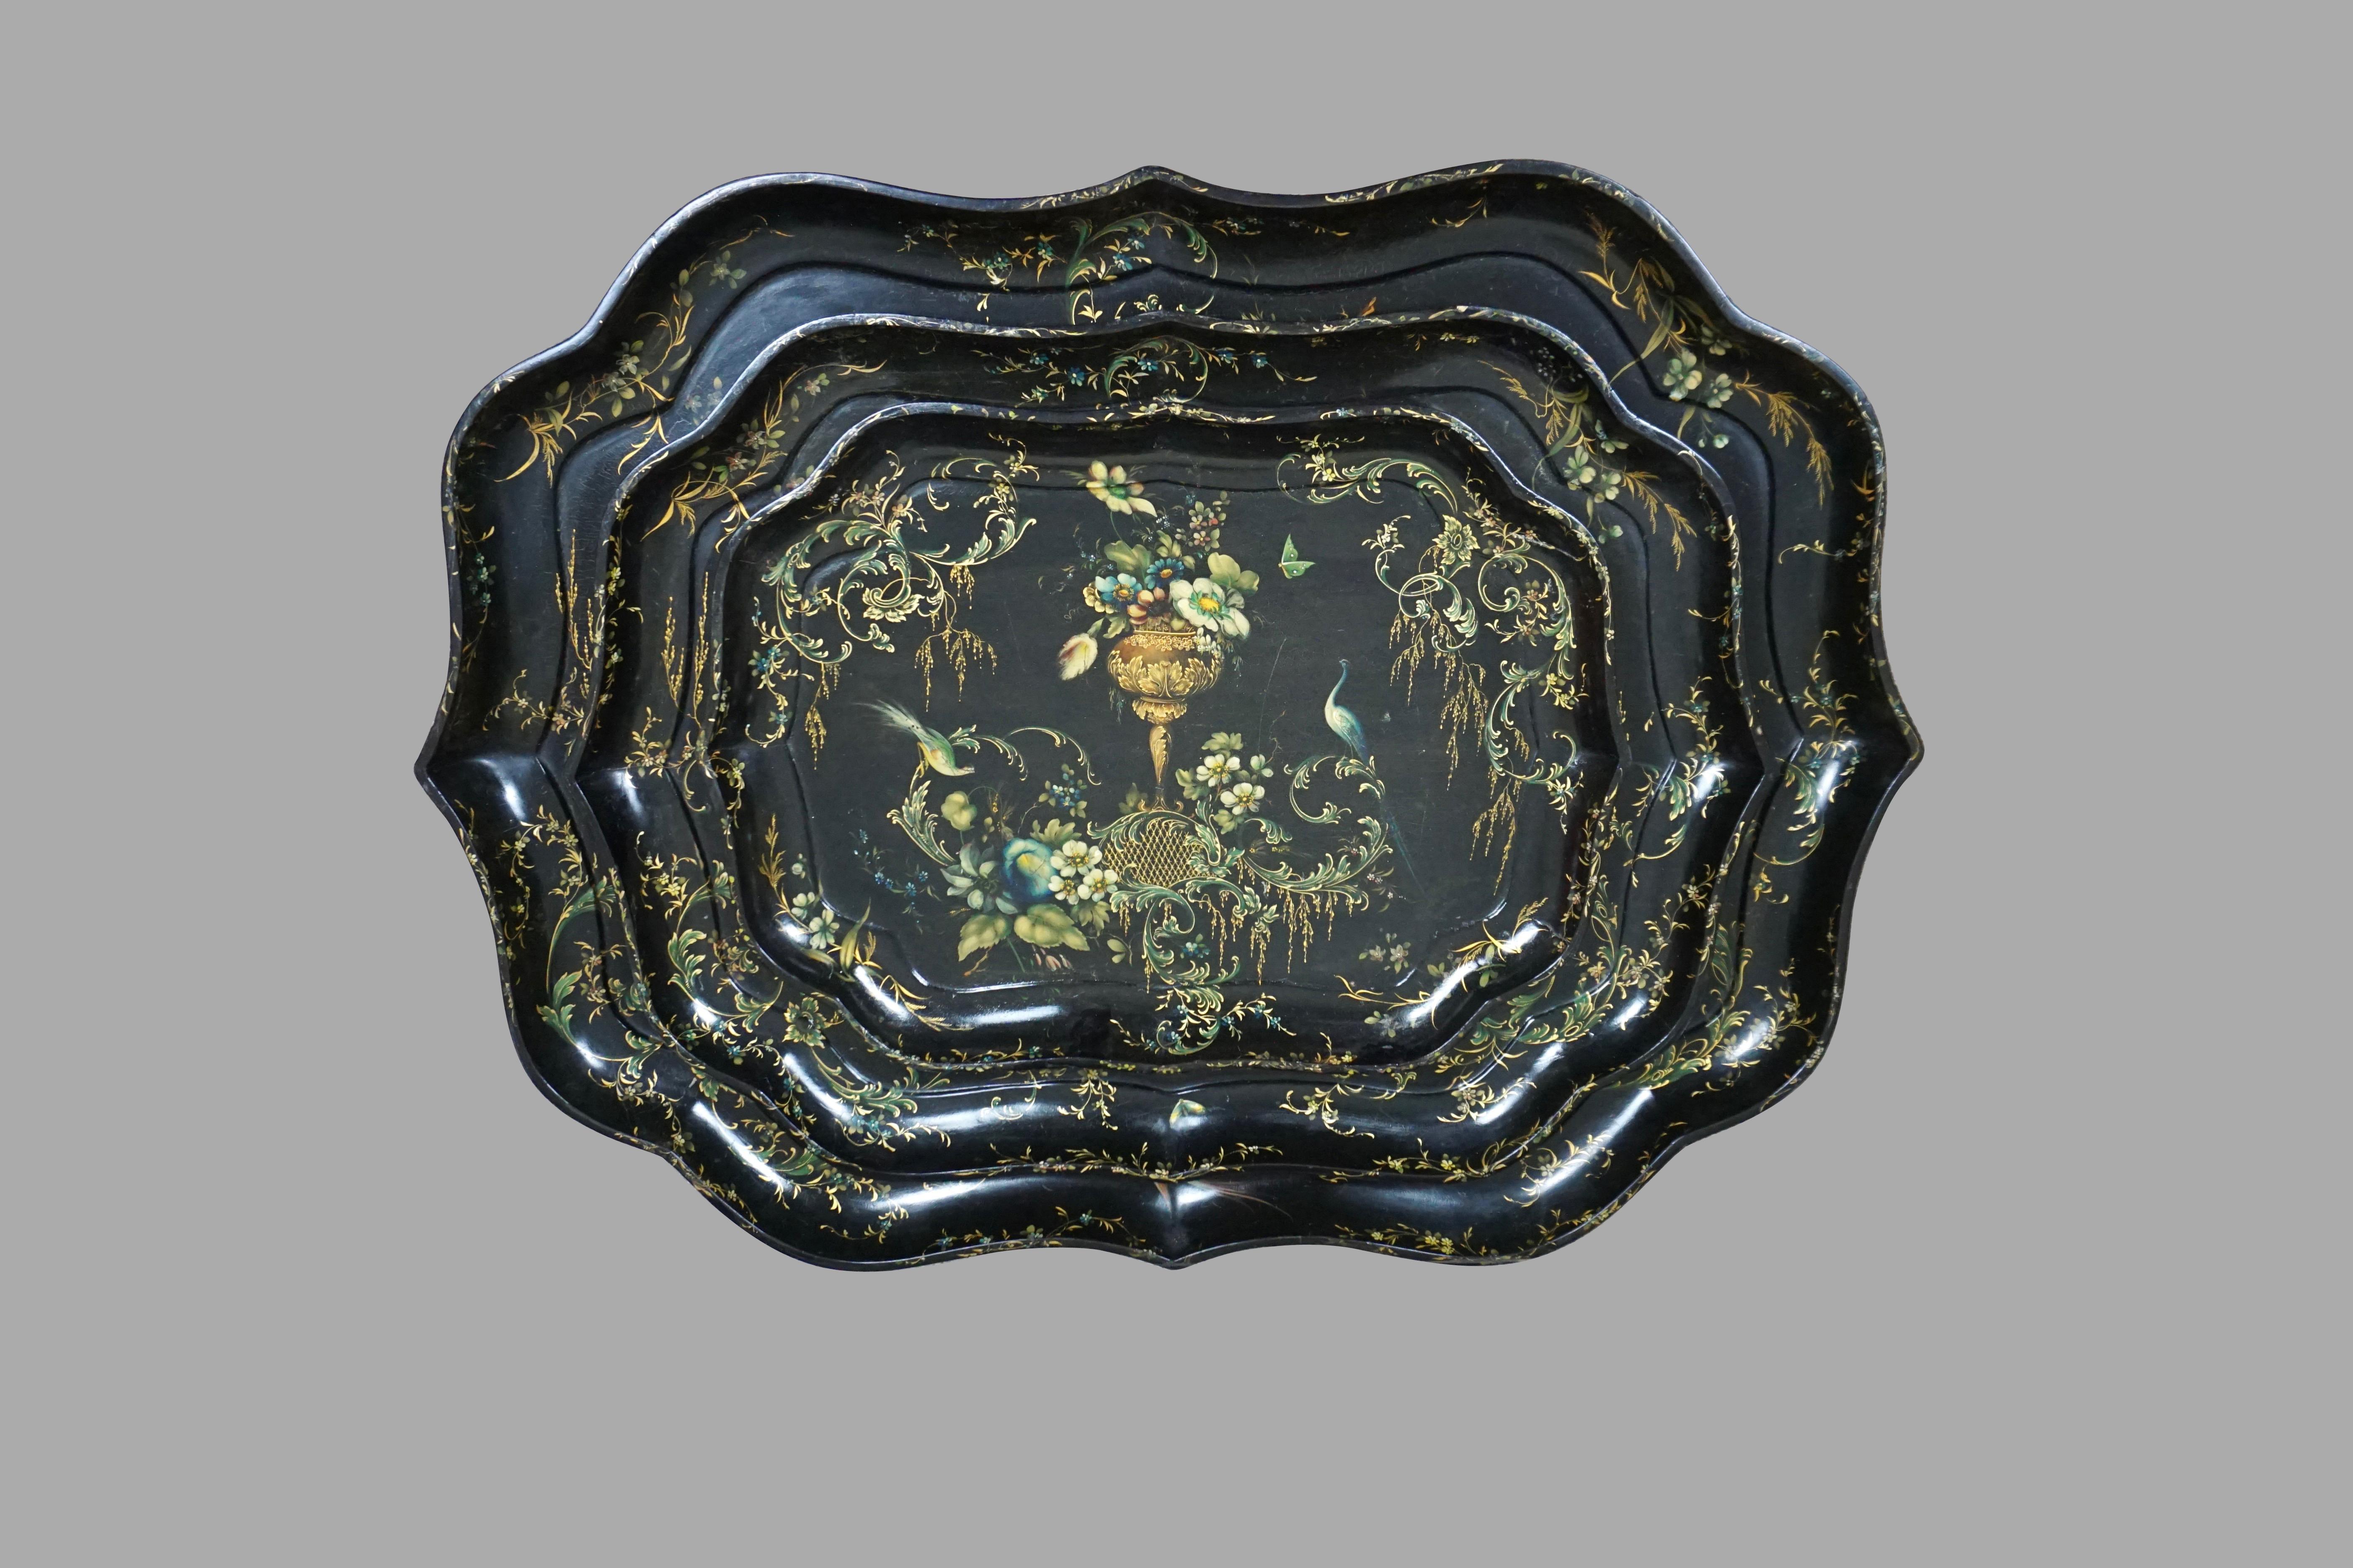 A rare set of 3 English gilt and paint decorated papier mâché scallop form trays with foliate and bird decoration on a black field, the central floral bouquets flanked by exotic birds. It is unusual to find complete sets of graduated trays of this